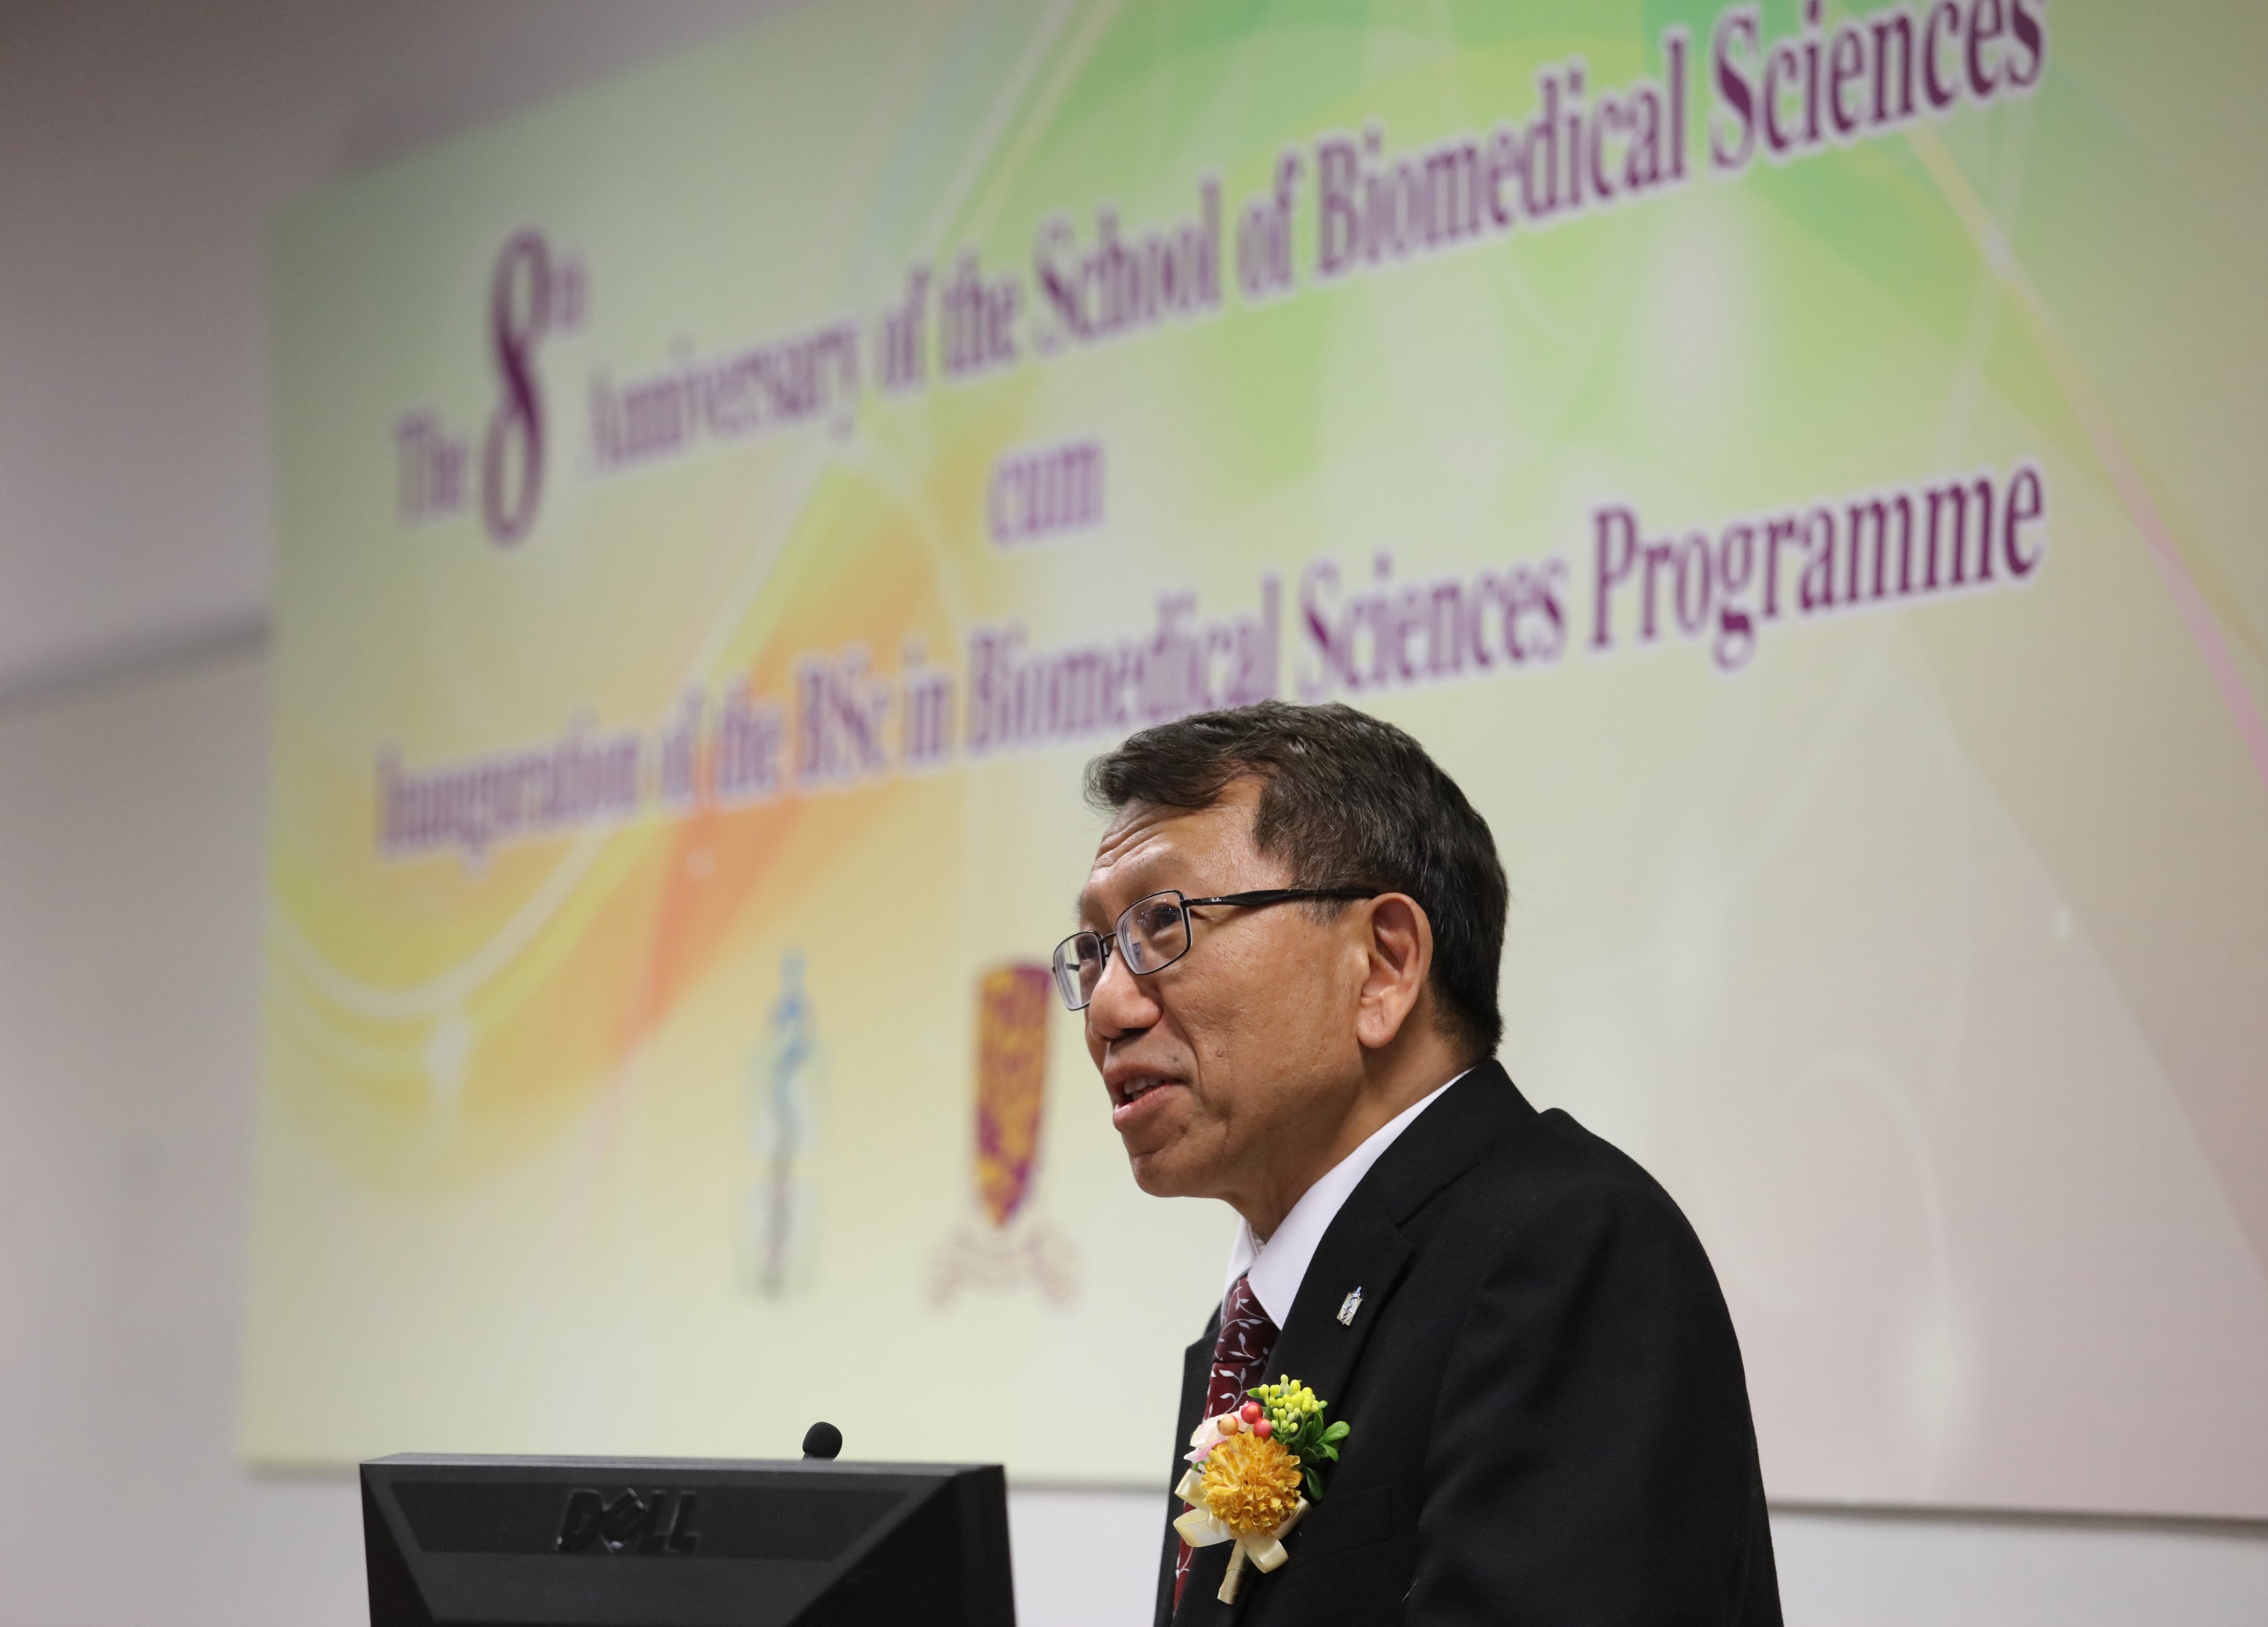  Prof. Rocky S. TUAN, Vice-Chancellor and President of CUHK, states that the School of Biomedical Sciences will continue to play a leading and indispensable role and to carry out new translational medicine research projects for the benefits of society. 